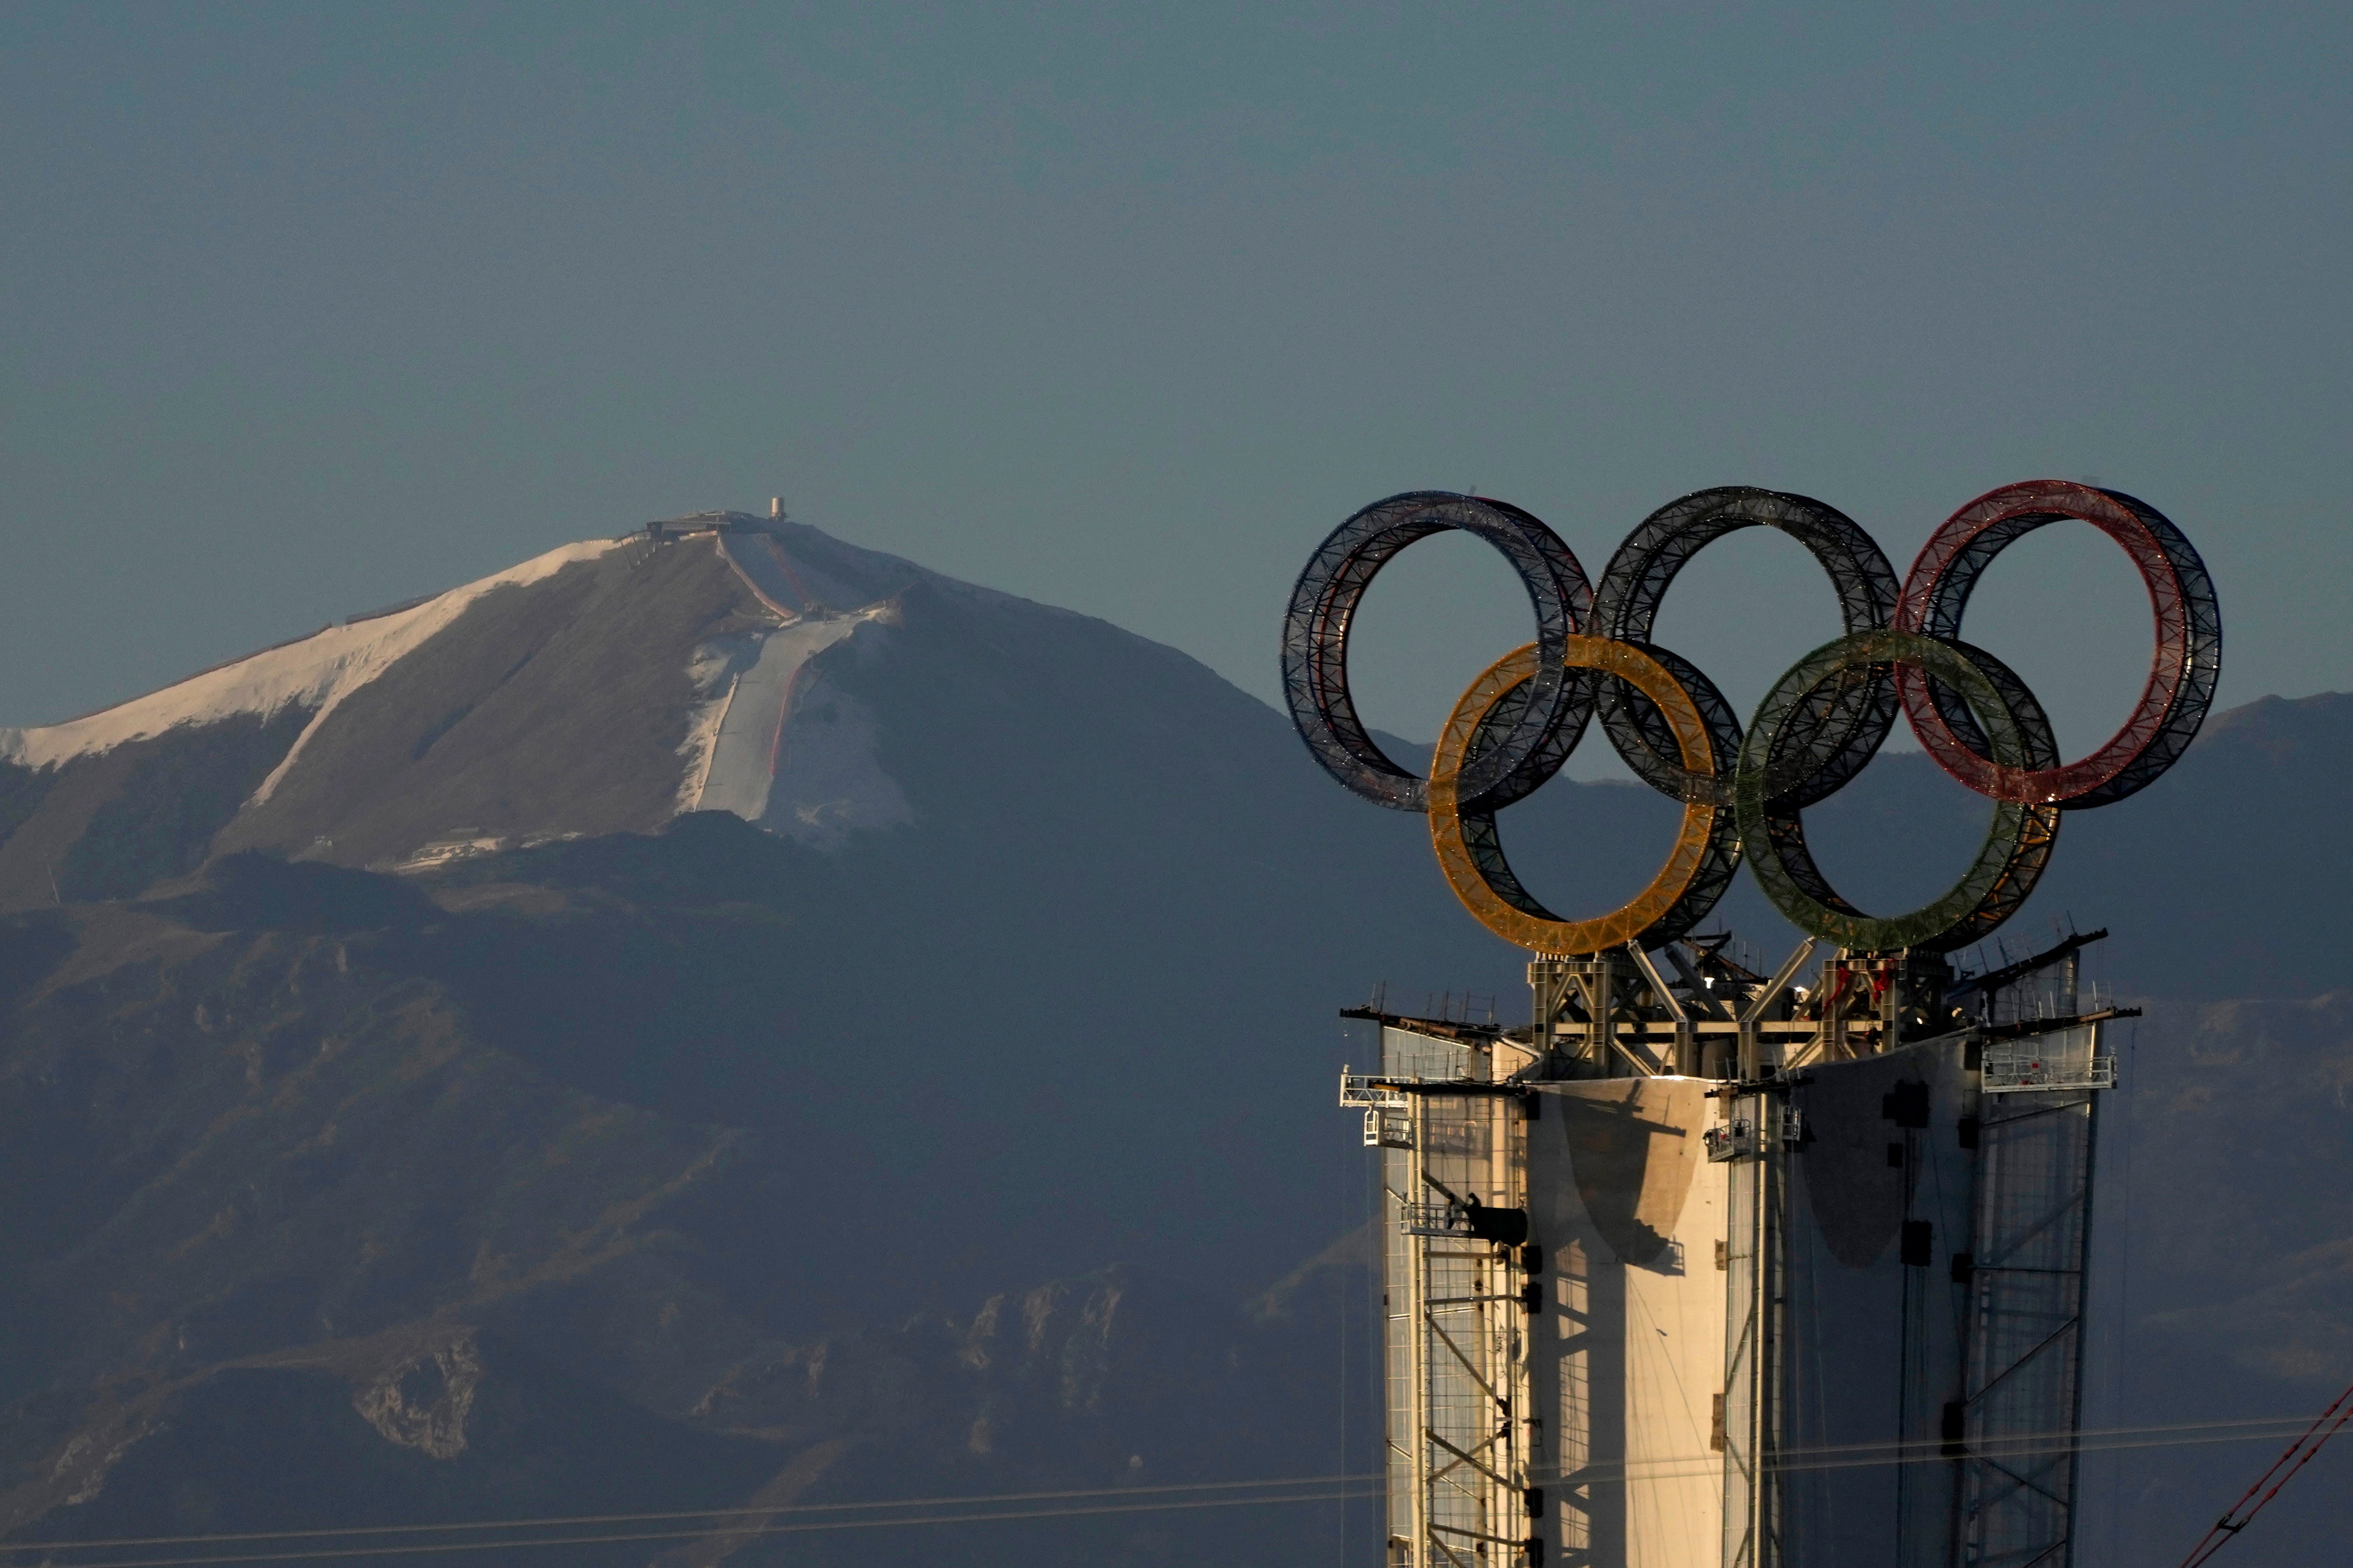 Olympics Rings are erected near a ski resort outside Beijing, China, on 13 January, 202